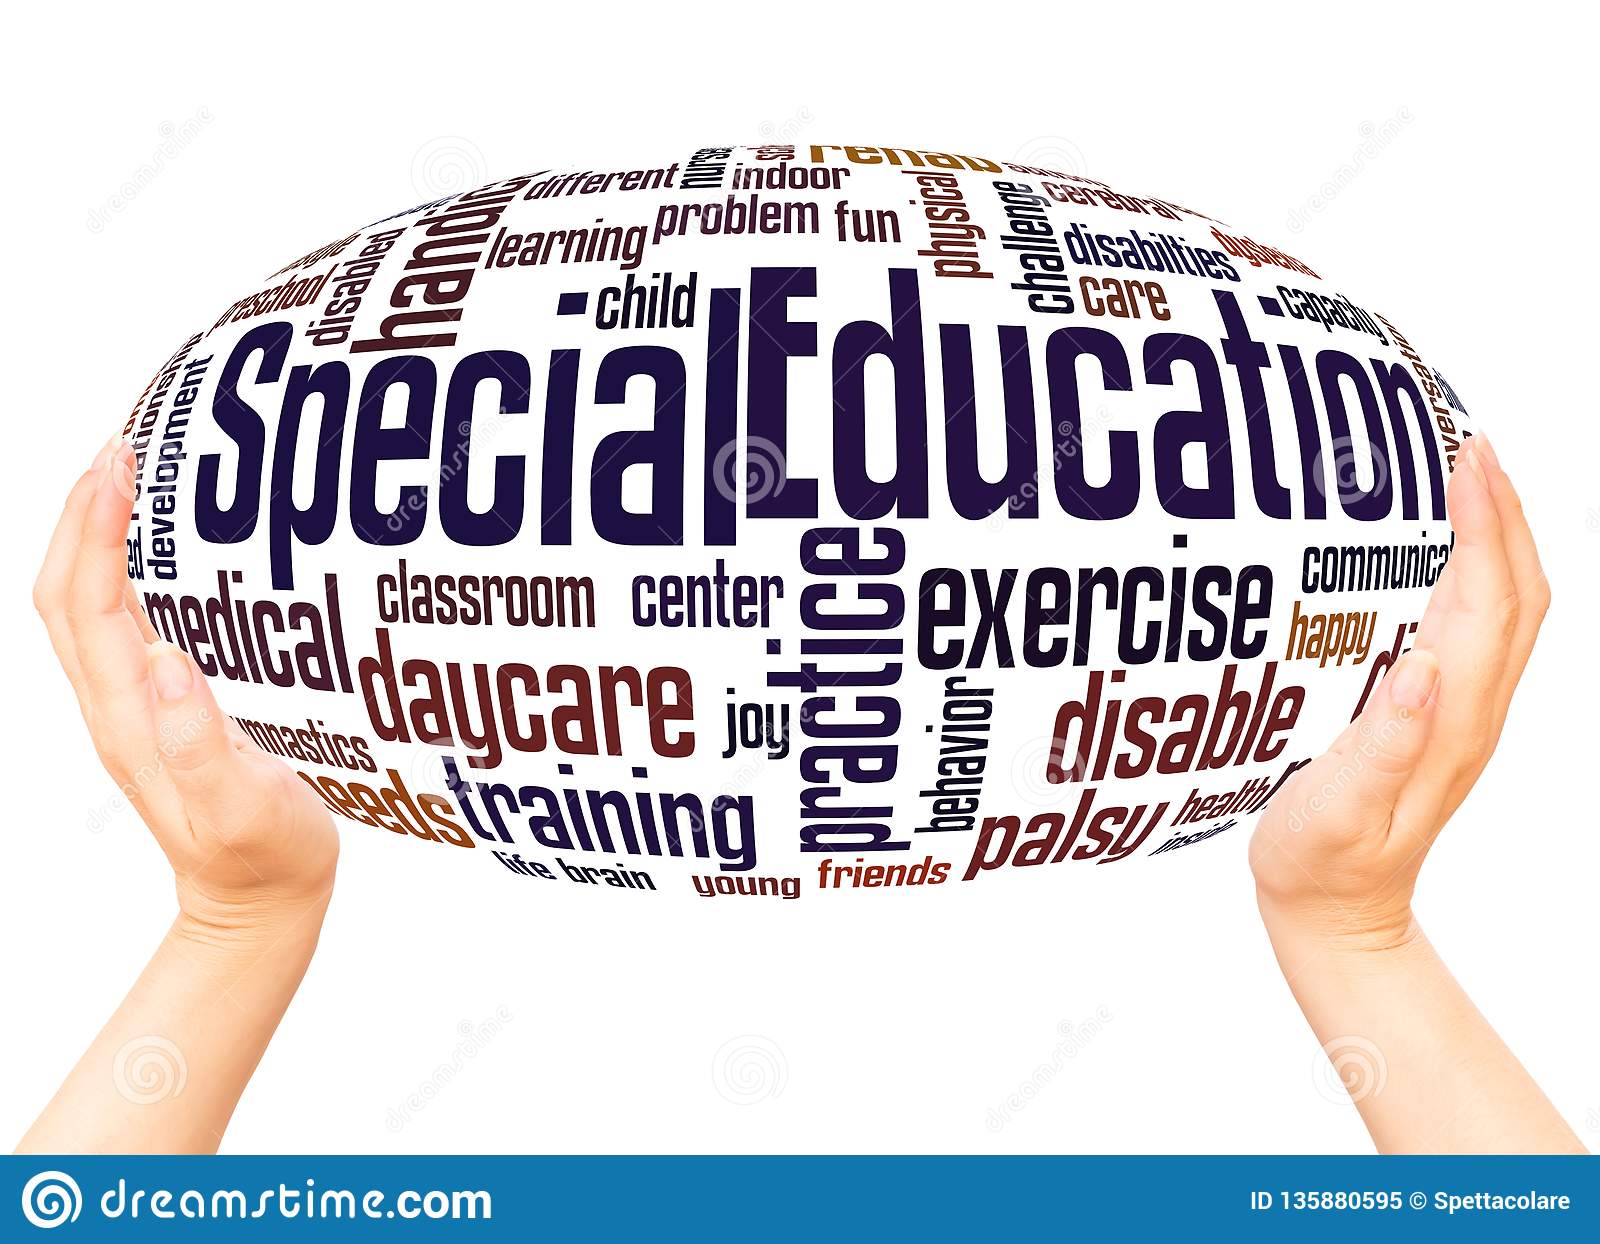 Hands holding a sphere with lots of words including special education